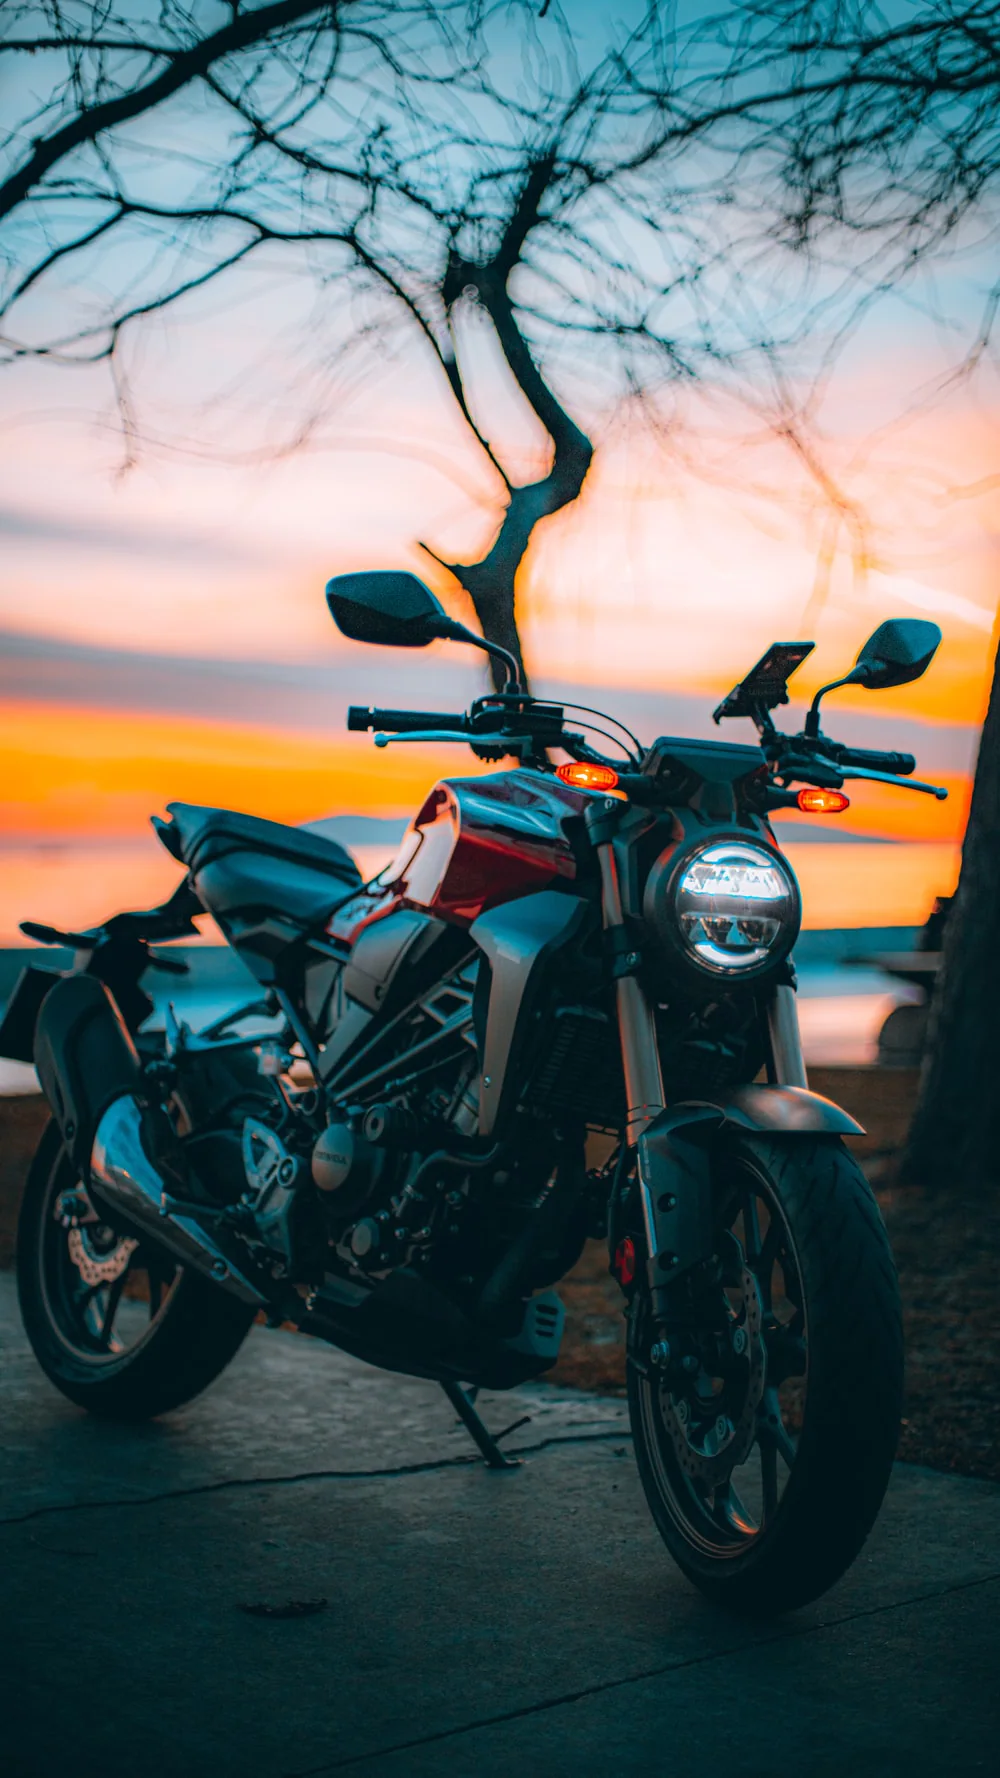 Market Analysis & Selling Tips for Used Motorcycle: Now is the Perfect Time